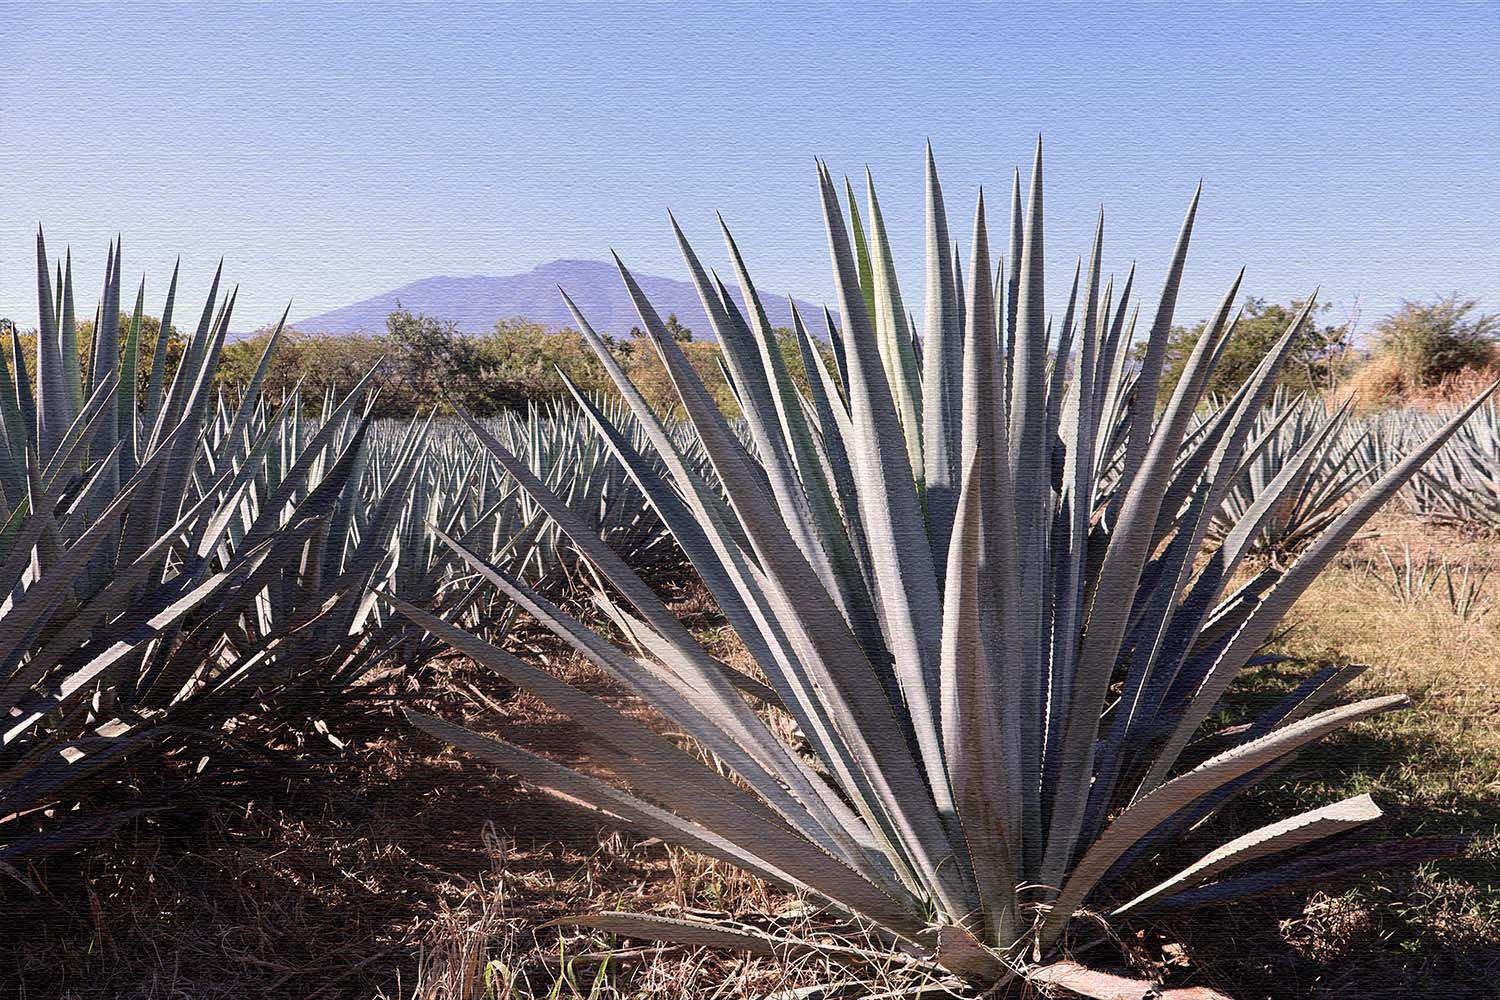 A giant agave plant in a field in Tequila, Mexico